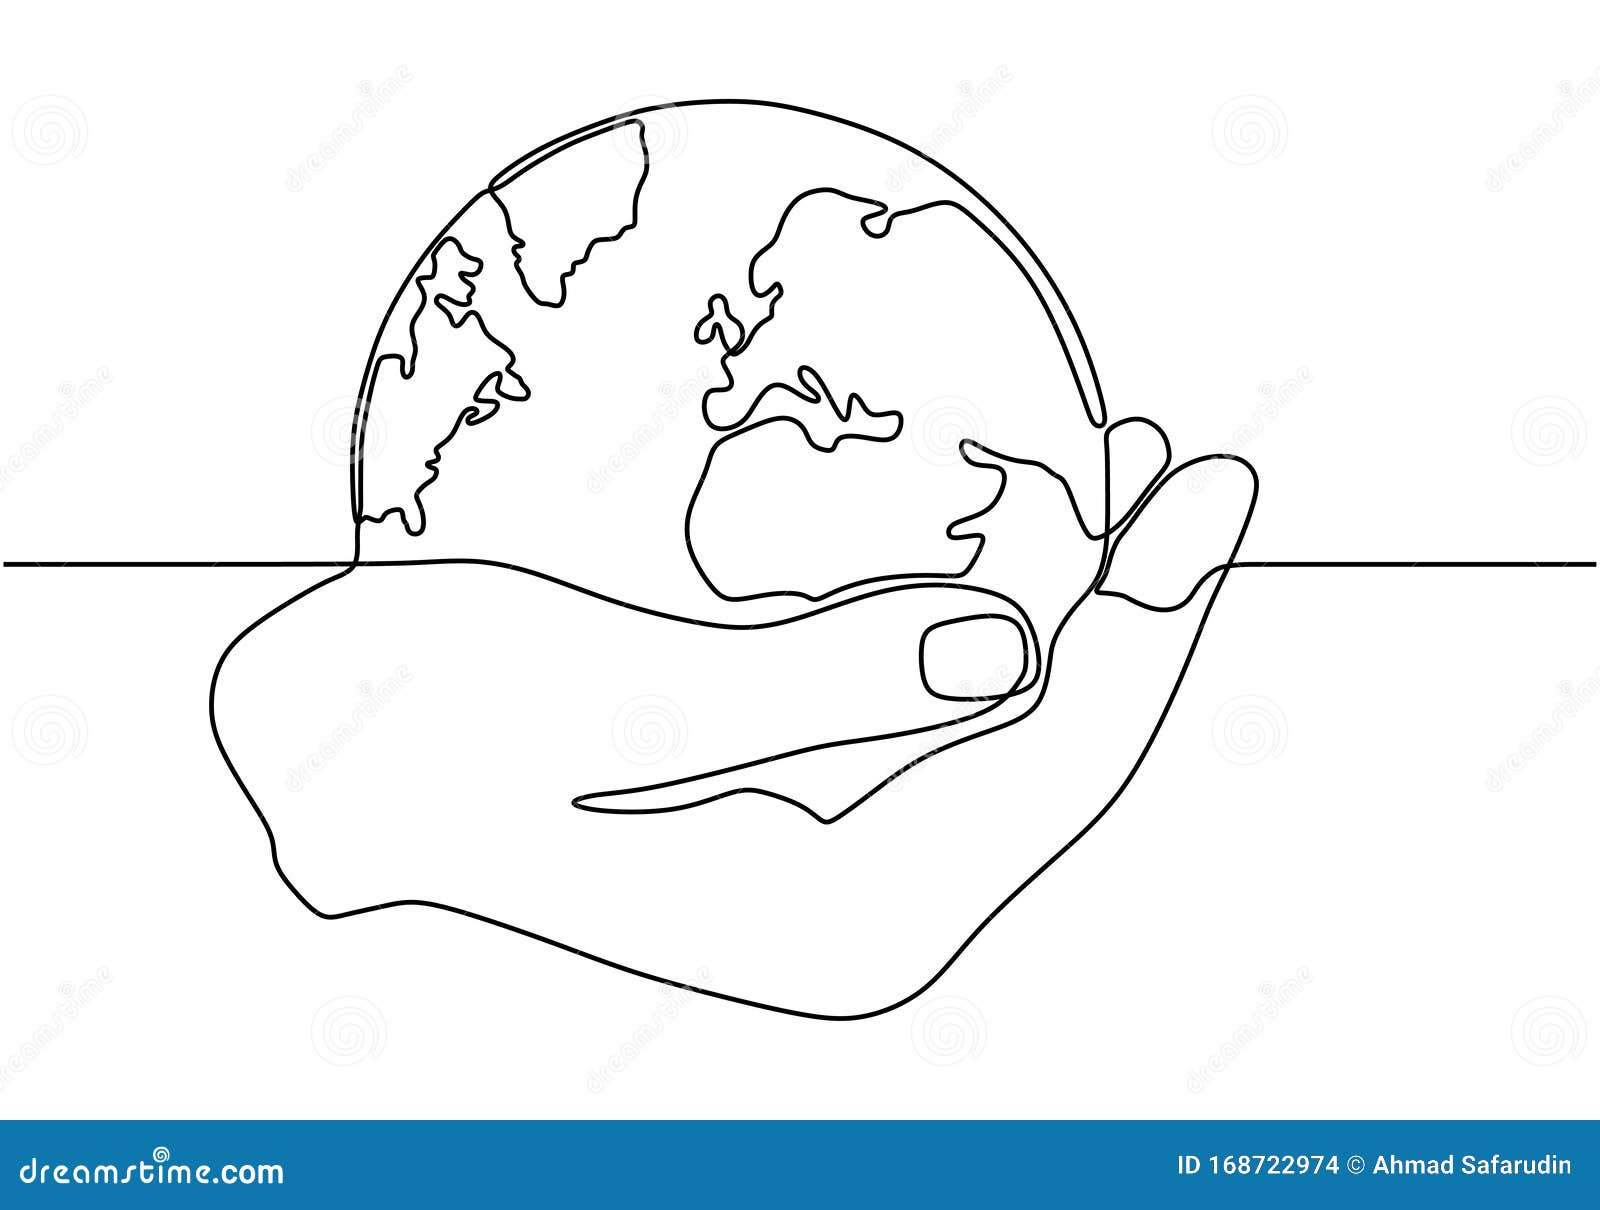 Continuous One Line Drawing Of Hand Holding World Globe Concept Of Earth And Ecology Conservation Stock Vector Illustration Of Icon Line